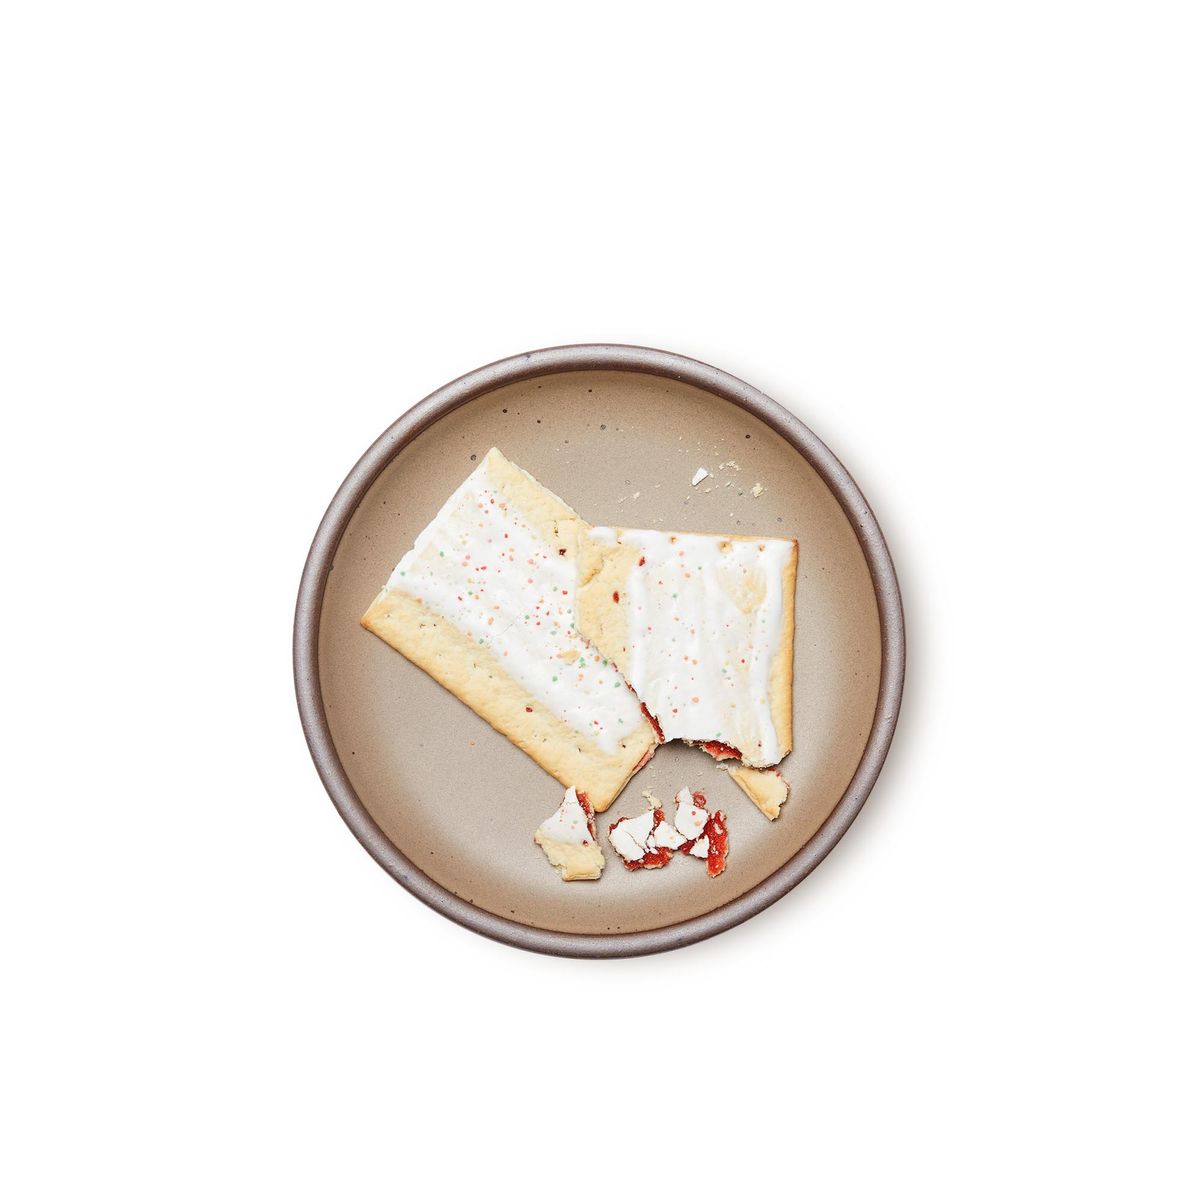 A poptart on a medium sized ceramic plate in a warm pale brown color featuring iron speckles and an unglazed rim.